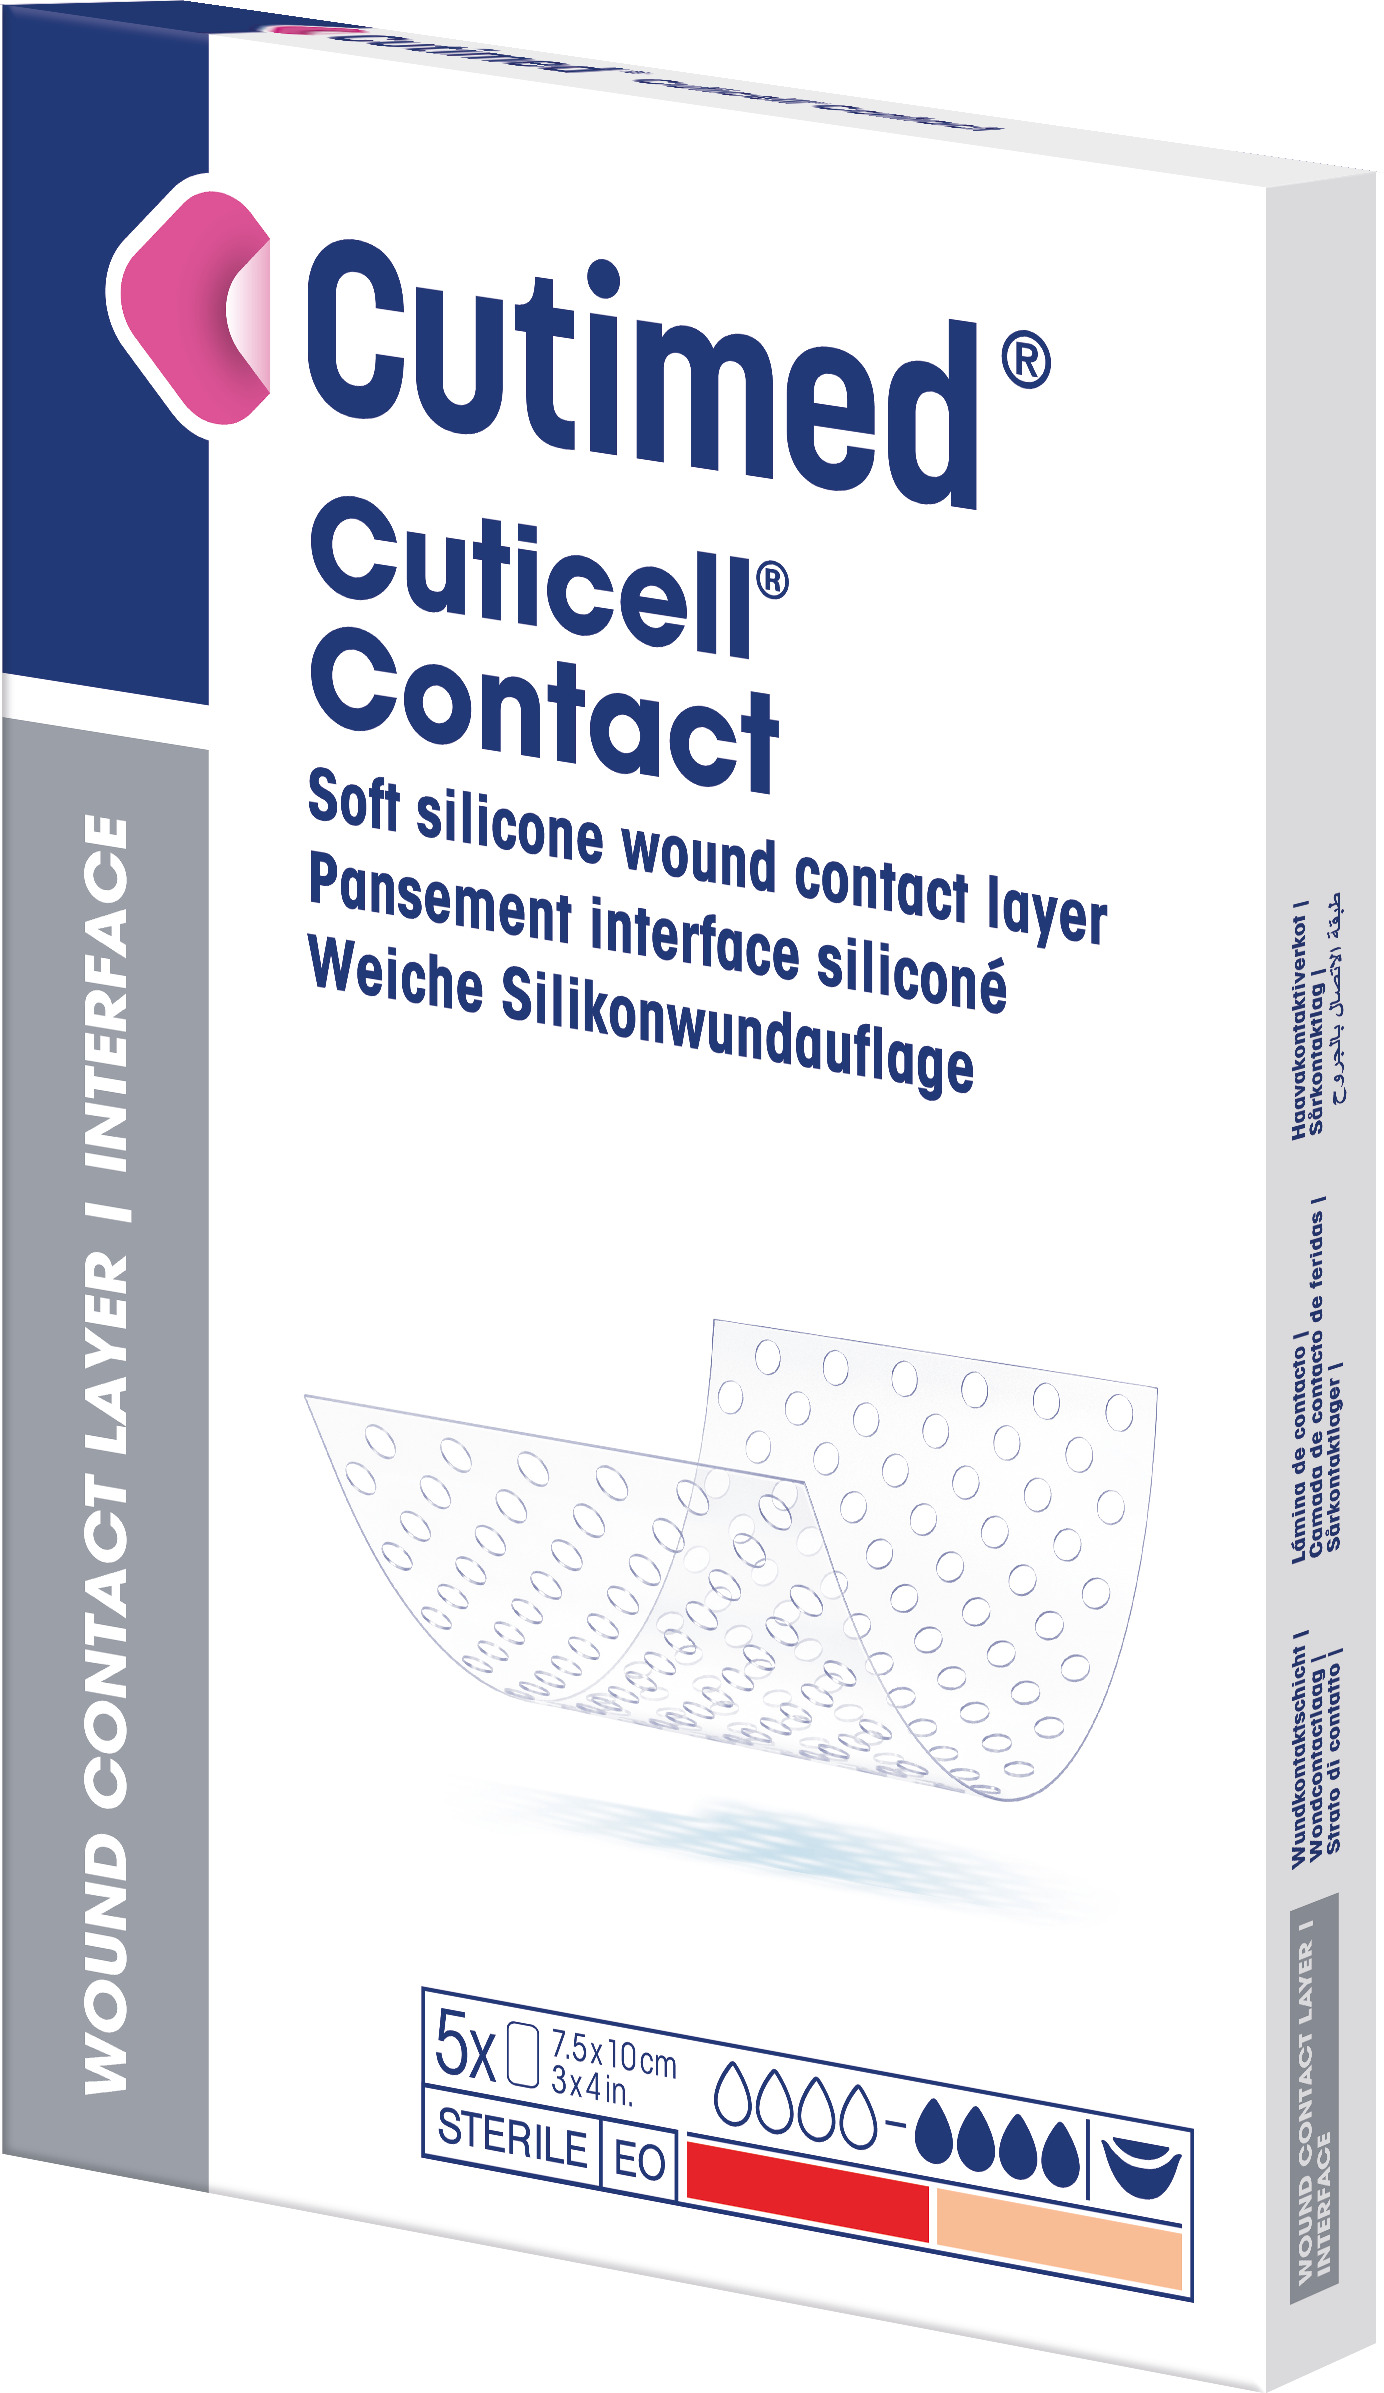 Cuticell Contact